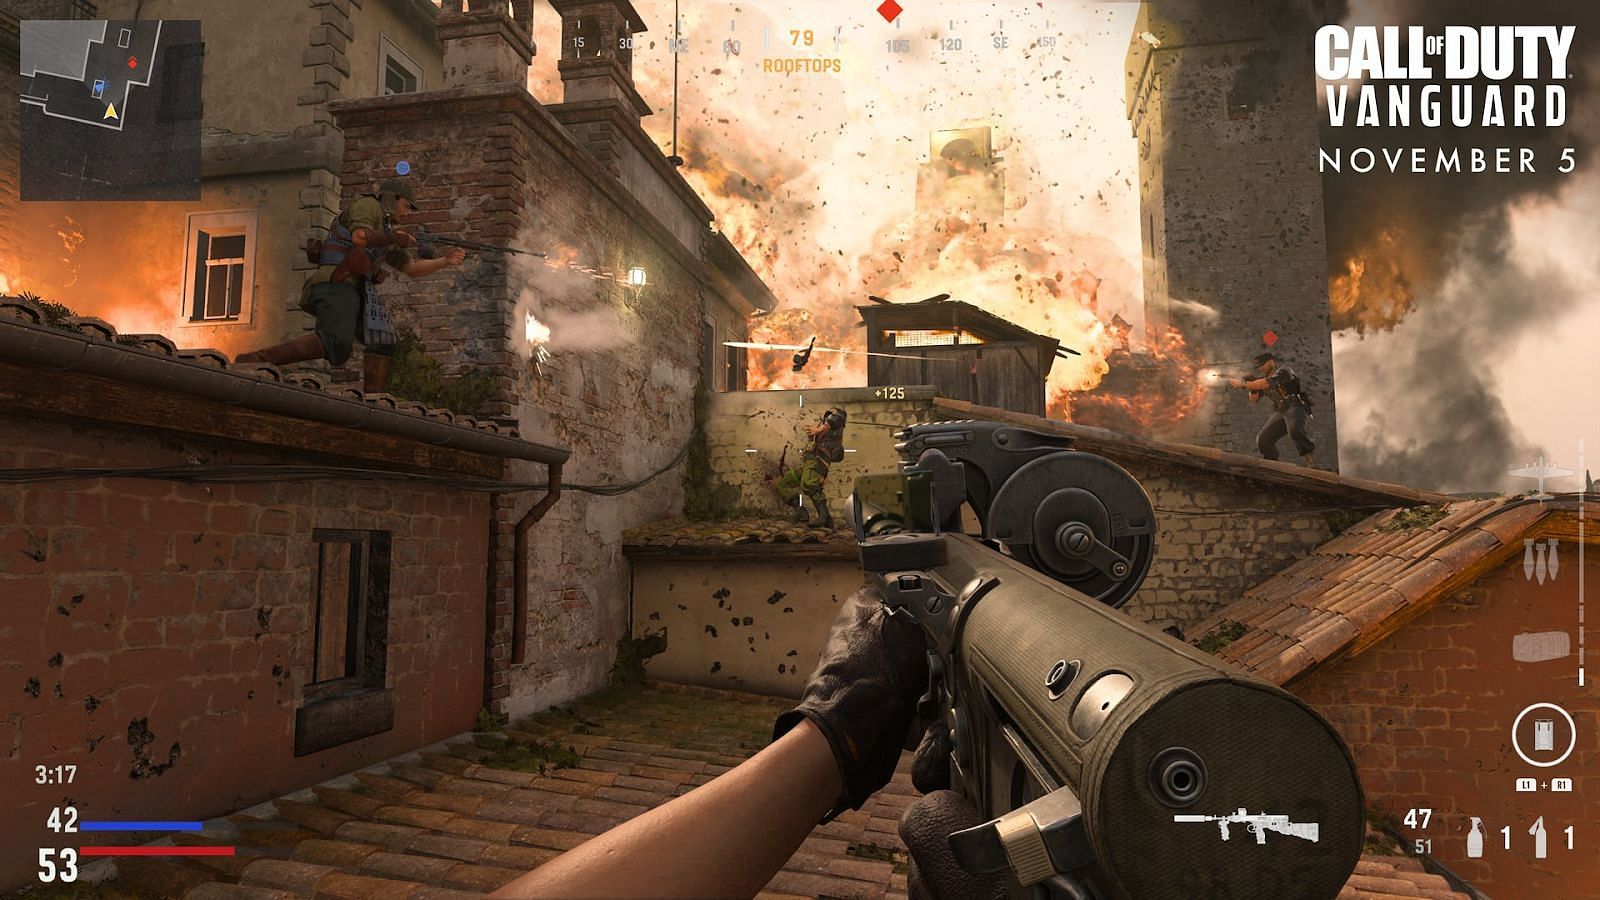 Call of Duty: Vanguard bugs prevents ADS kills from getting tracked (Image by Call of Duty:Vanguard)